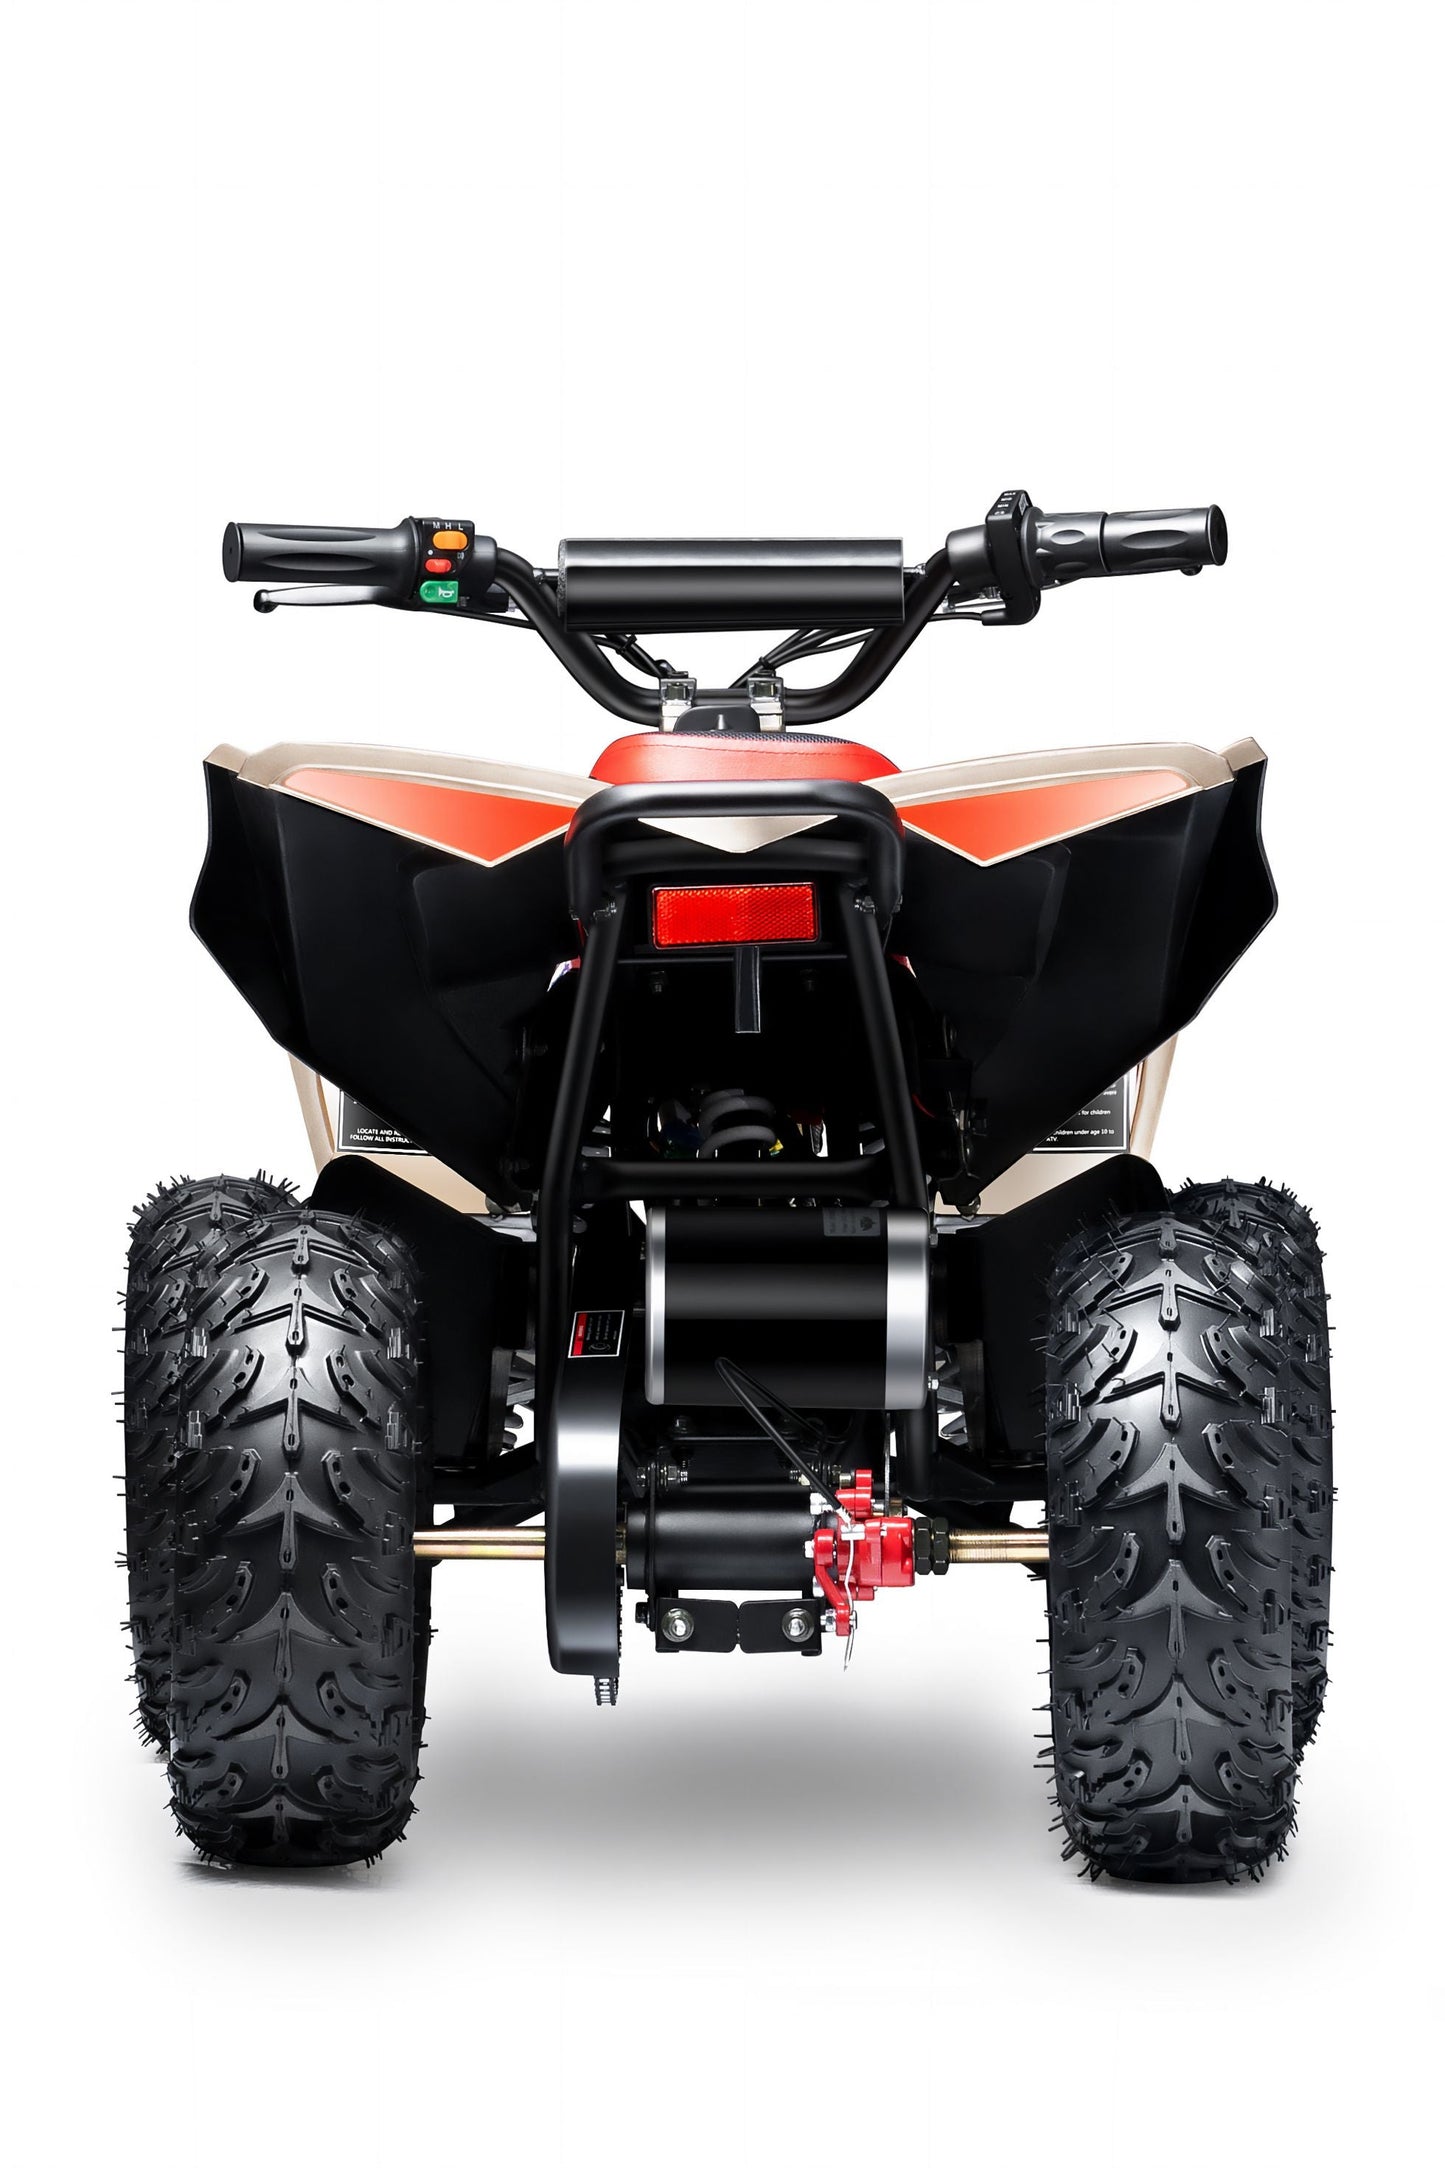 Electric ATV Quad 4 Wheeler 36V with Off-Road Tires - 220lbs Weight Capacity - Tested and Fully Assembled